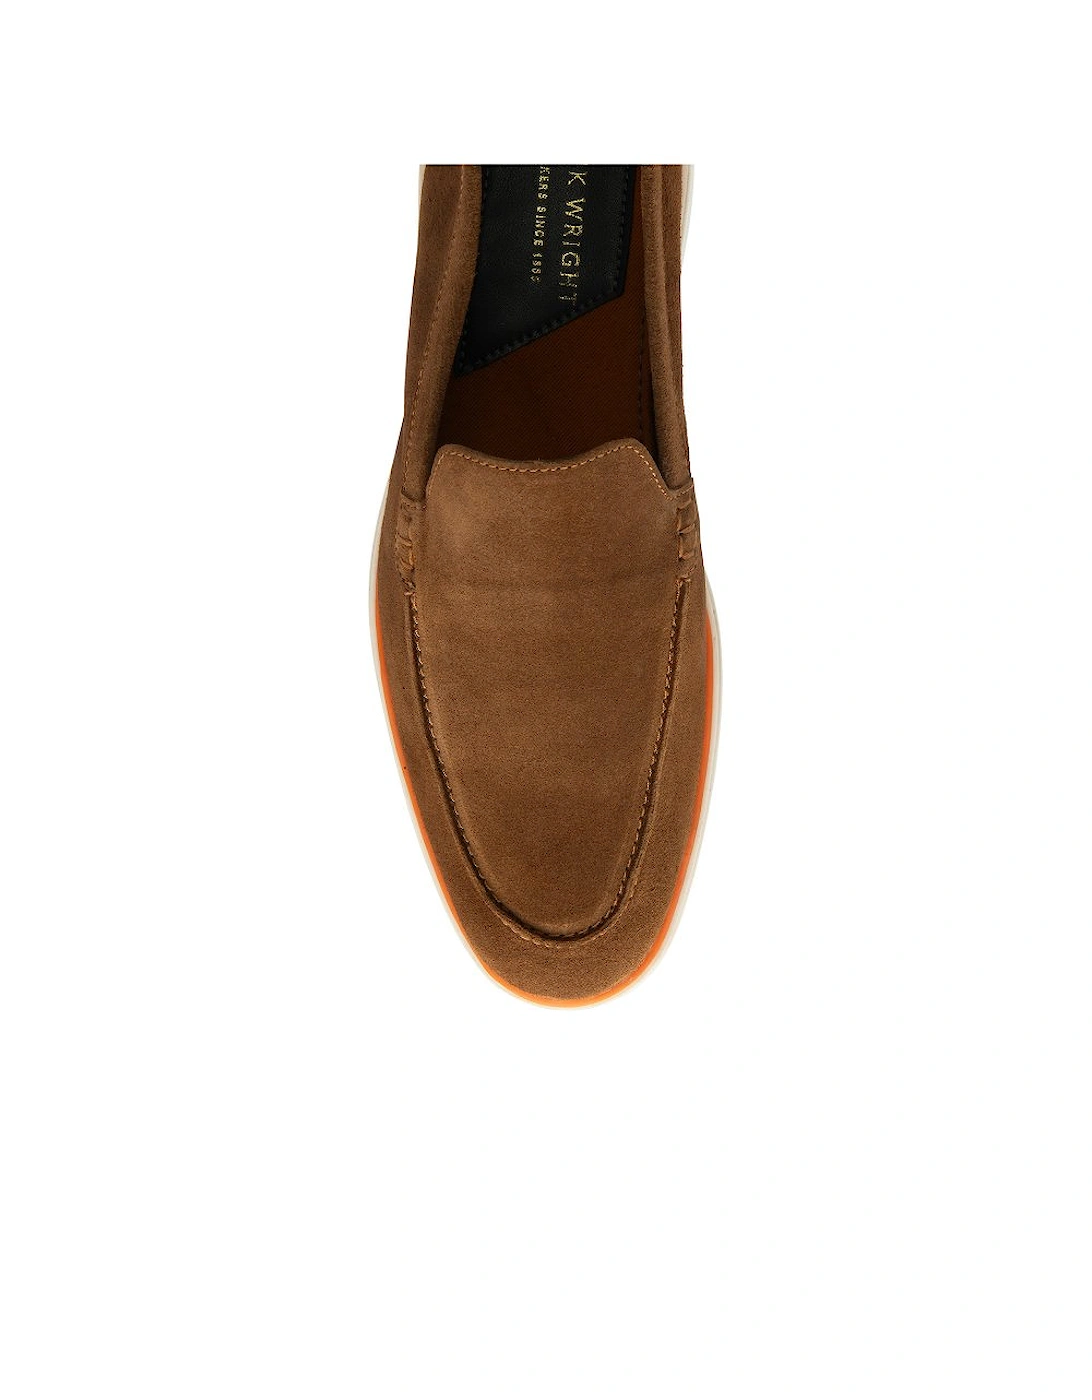 Simmons Mens Loafers